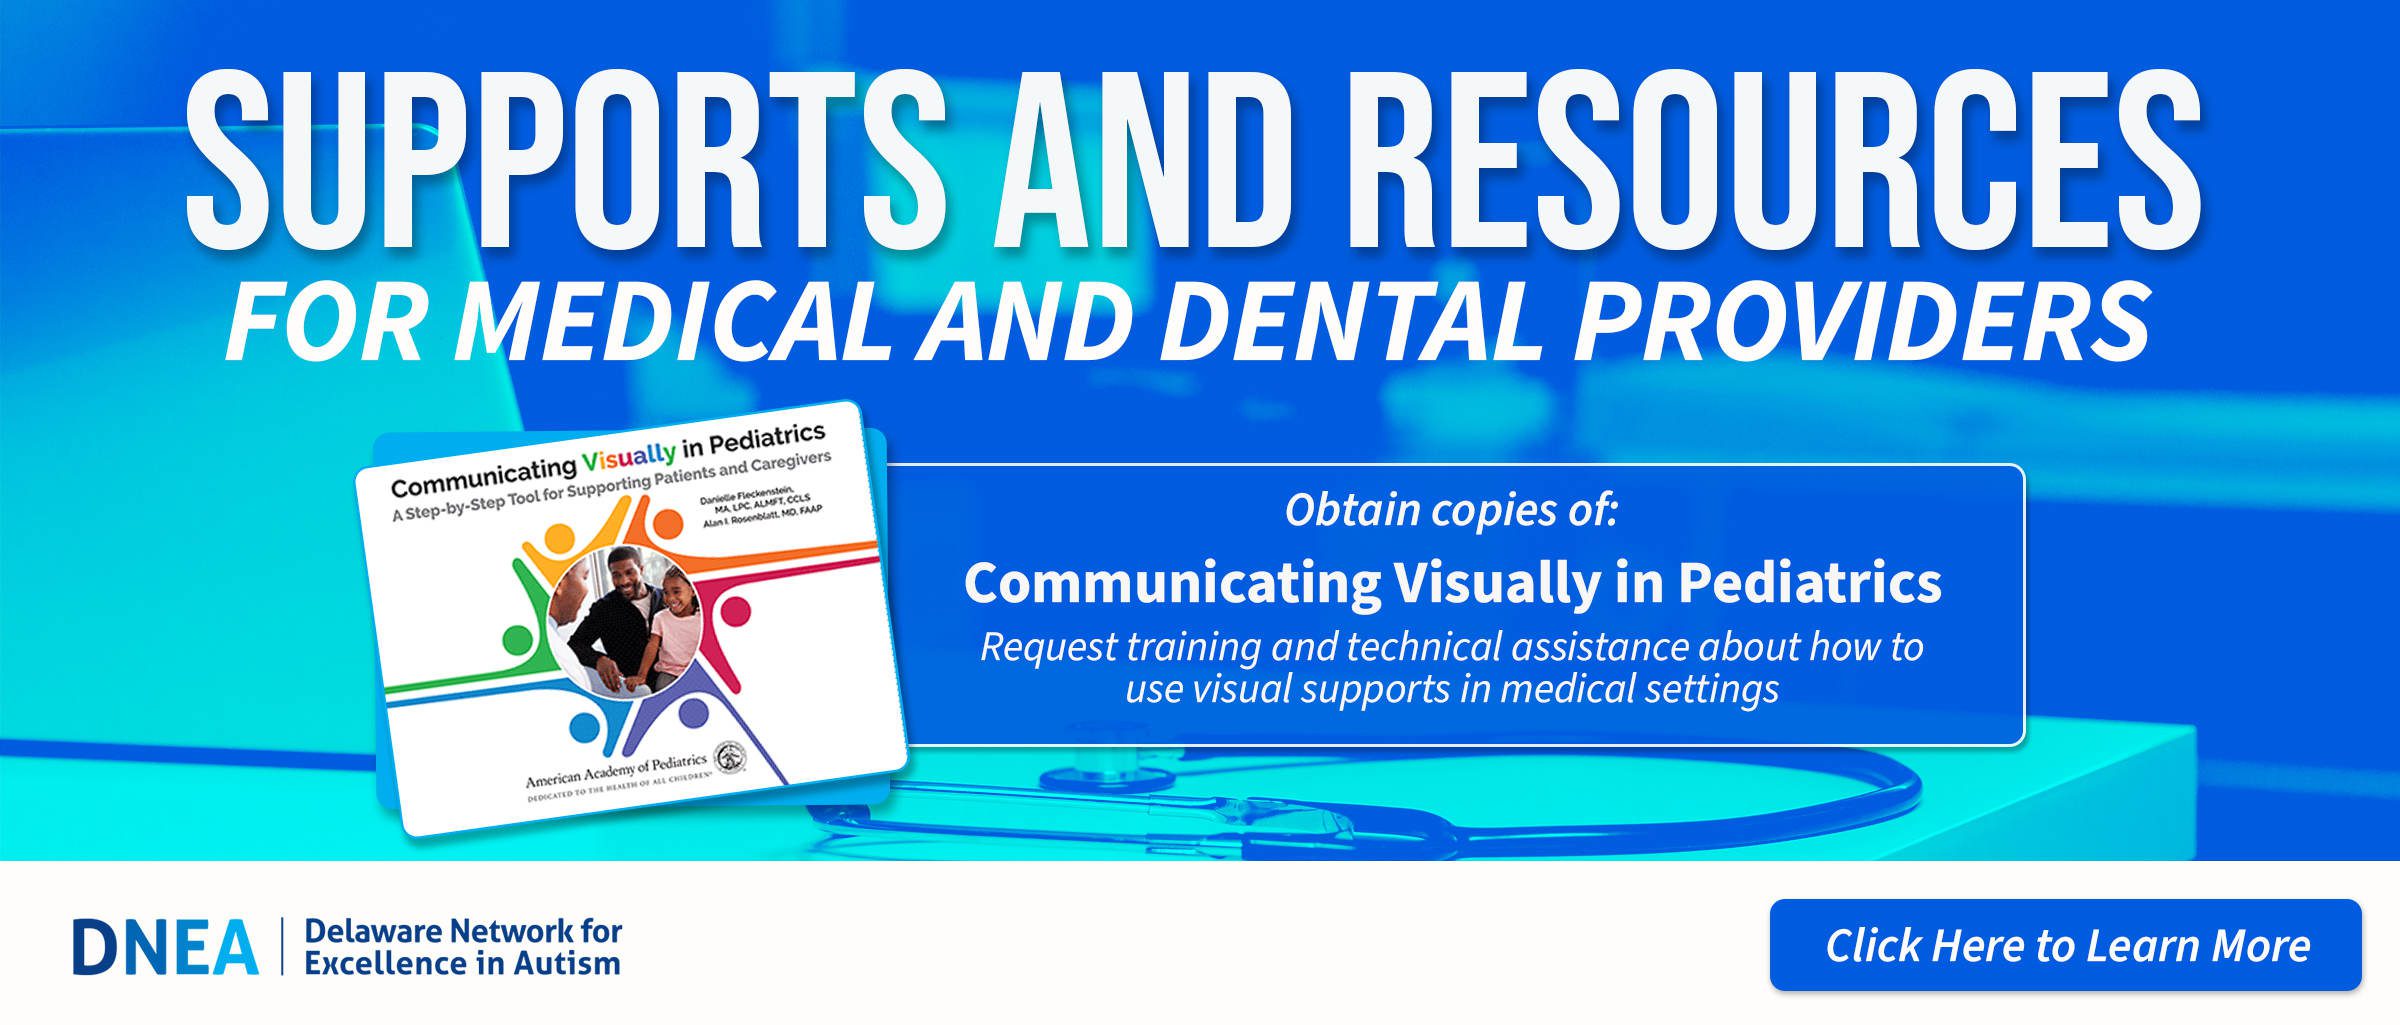 Supports and Resources for medical and dental providers. Obtain copies of Communication Visually in Pediatrics. Request training and technical assistance about how to use visual supports in medical settings.